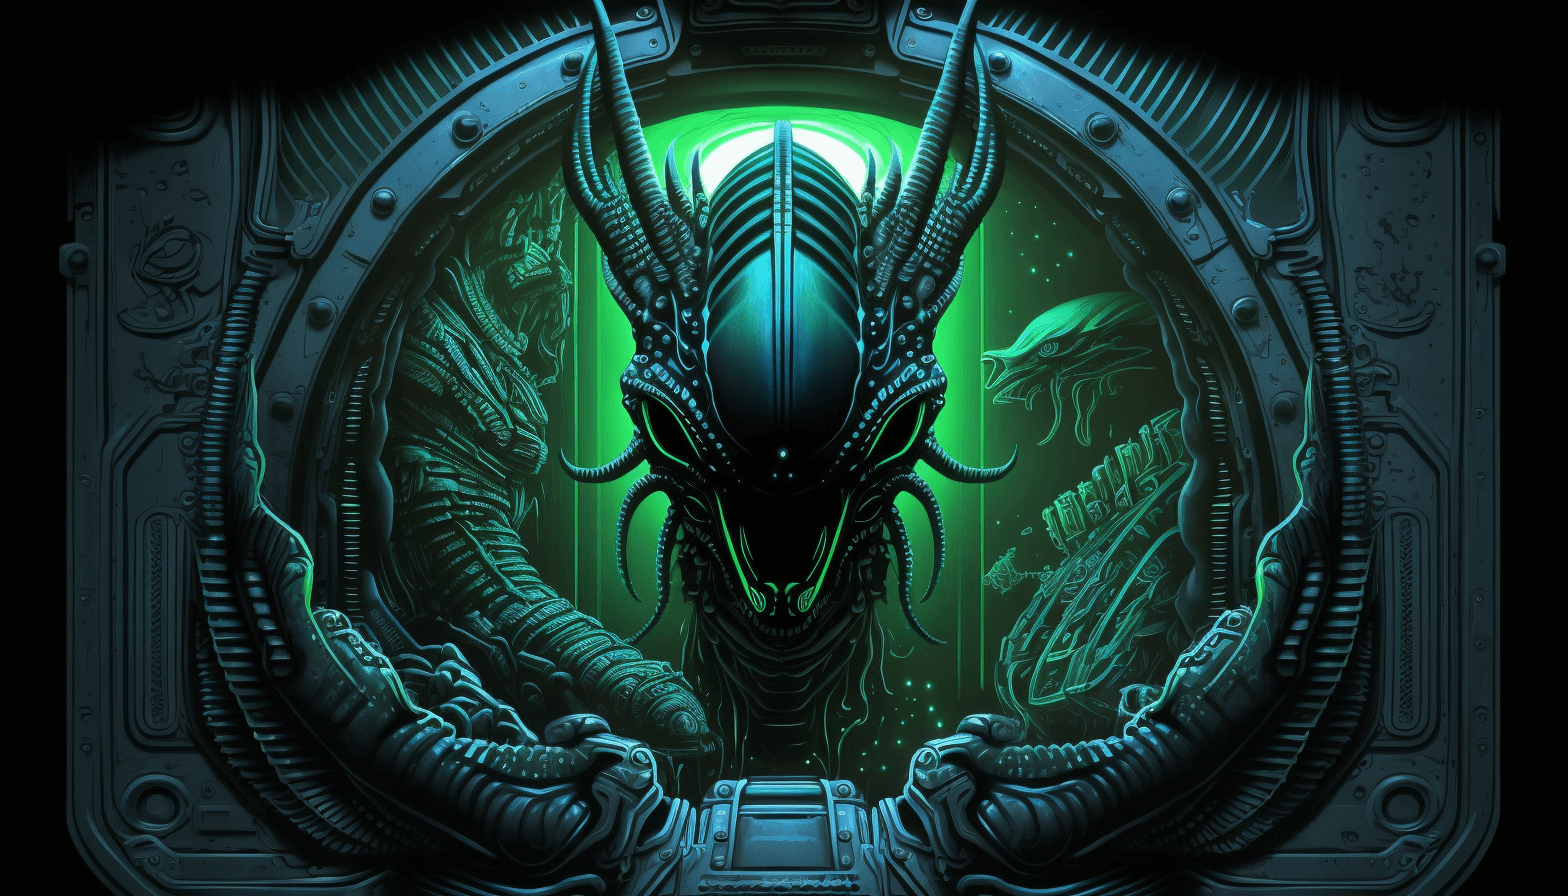 Xenomorph v3: a new variant with ATS targeting more than 400 institutions